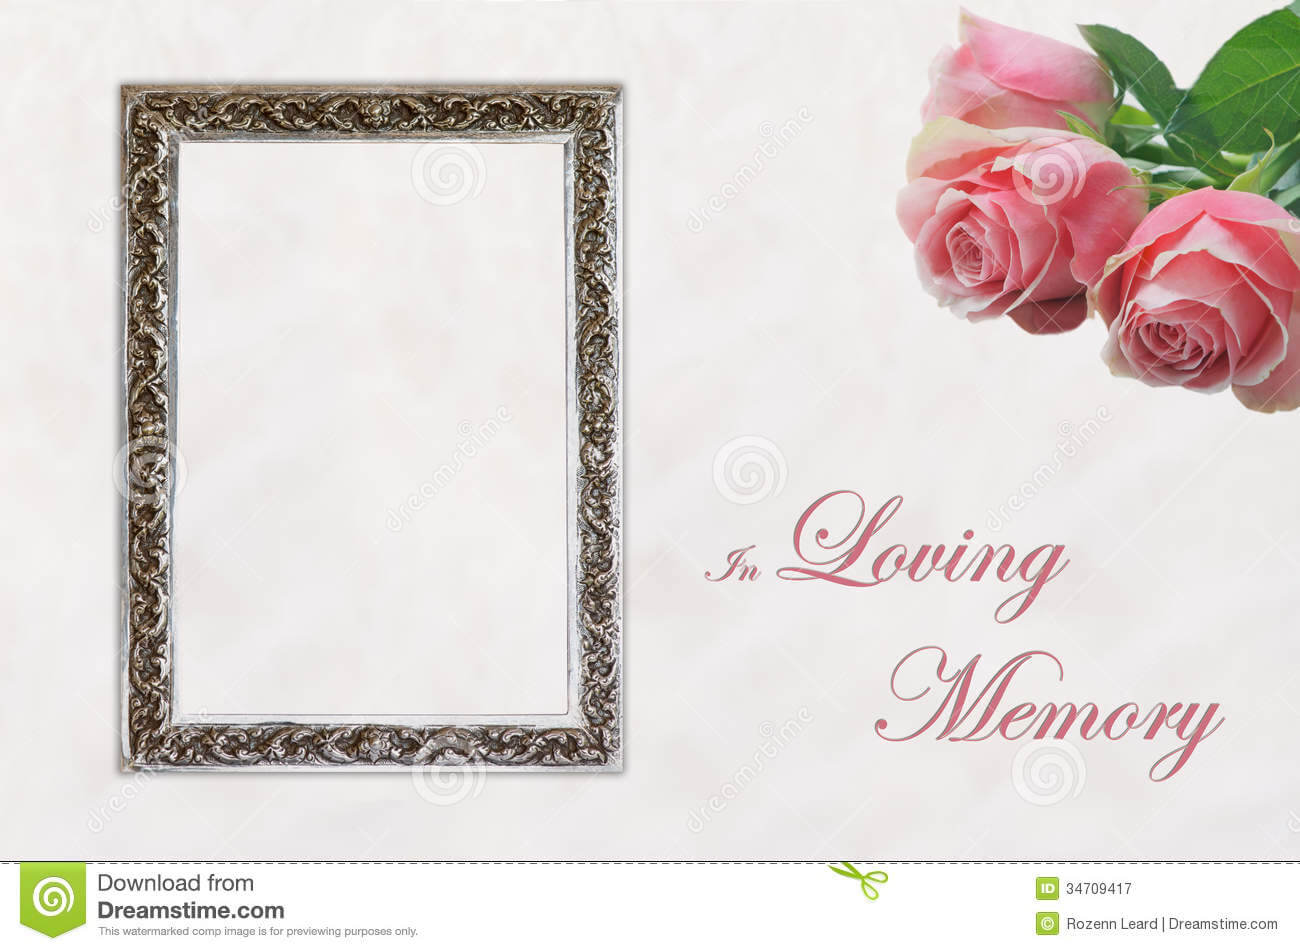 Funeral Eulogy Card Stock Image. Image Of Celebration – 34709417 Within In Memory Cards Templates